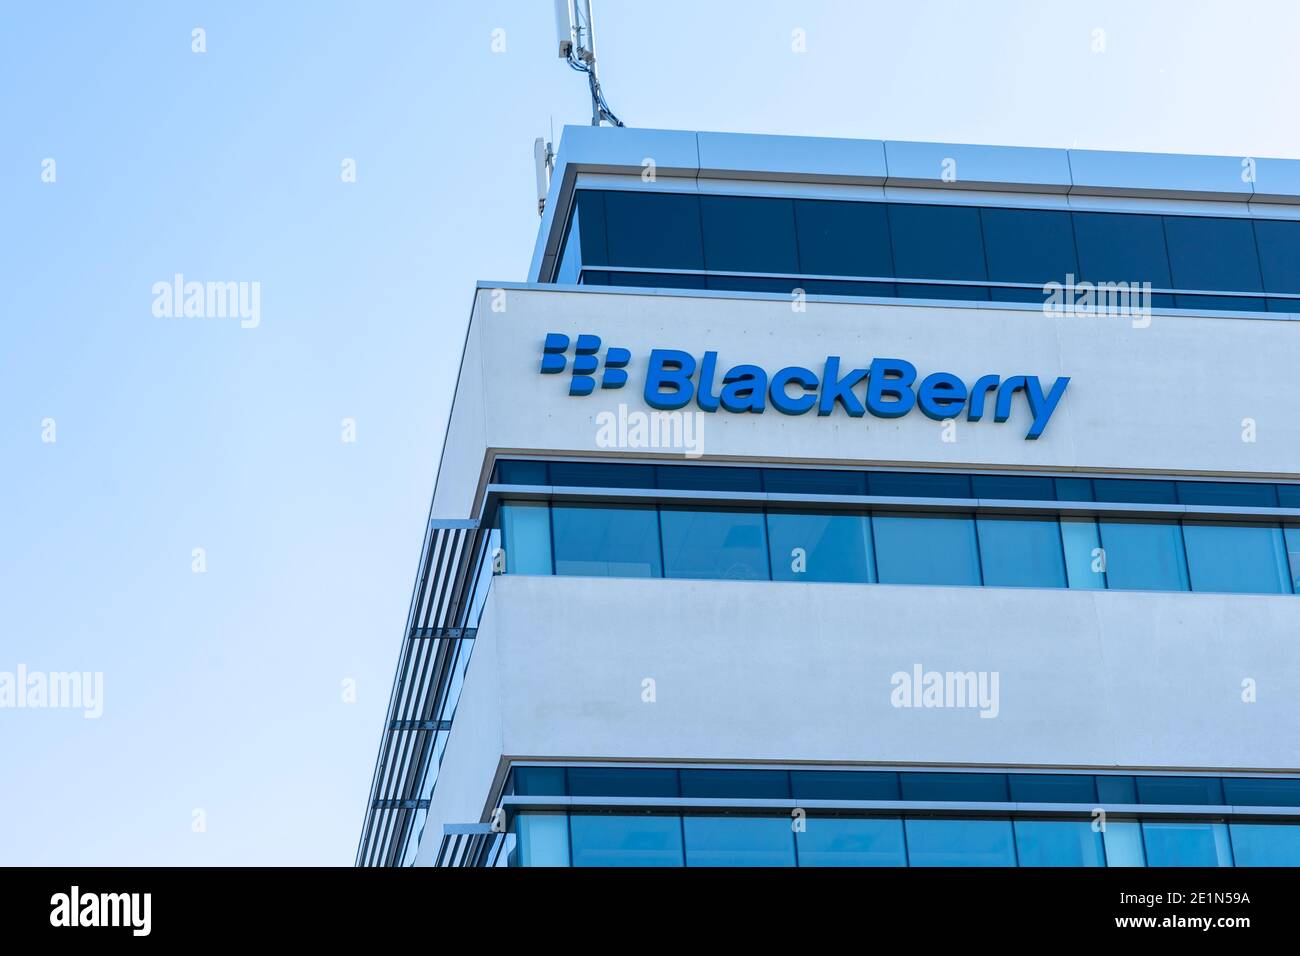 Waterloo, On, Canada - October 17, 2020: BlackBerry sign on their headquarters building is seen in Waterloo, Ontario, Canada. Stock Photo